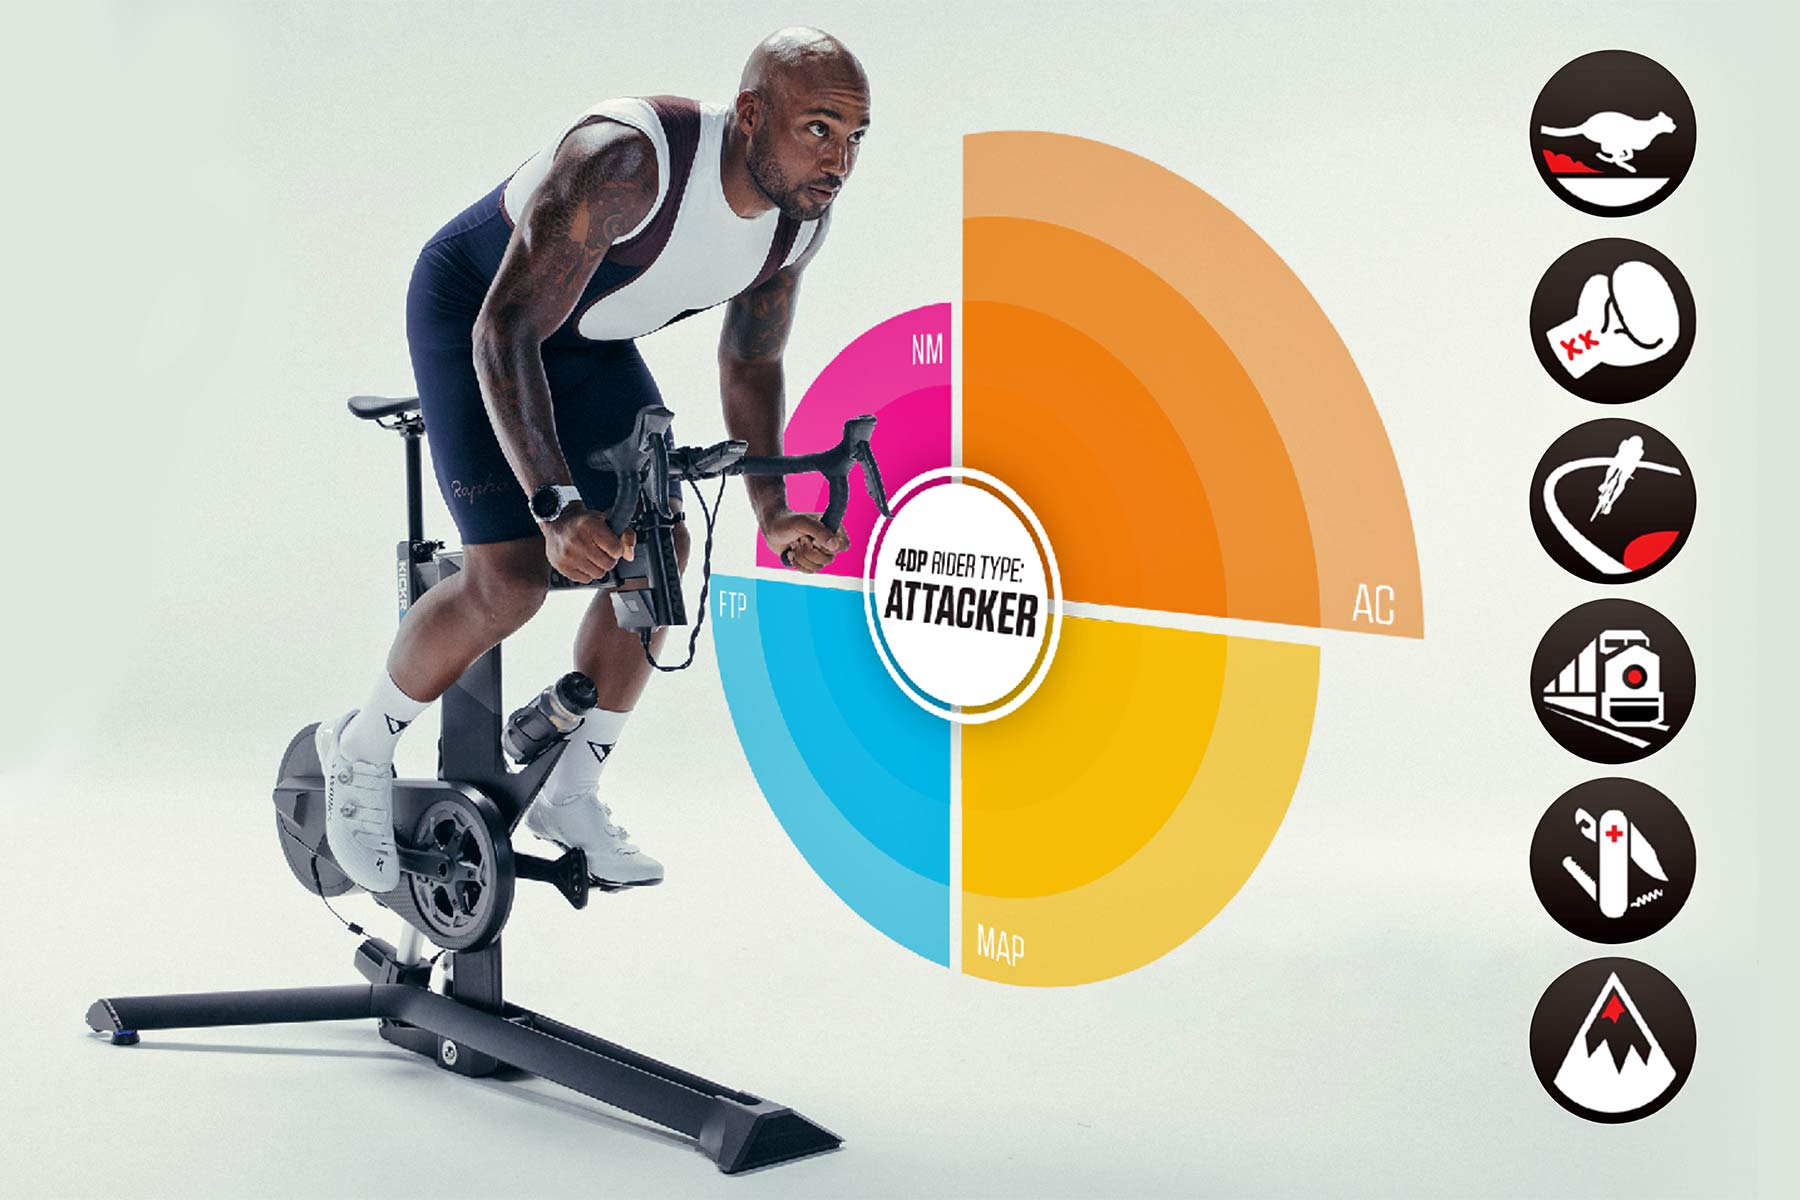 Wahoo Systm cycling structured training app, based on The Sufferfest, 4DP